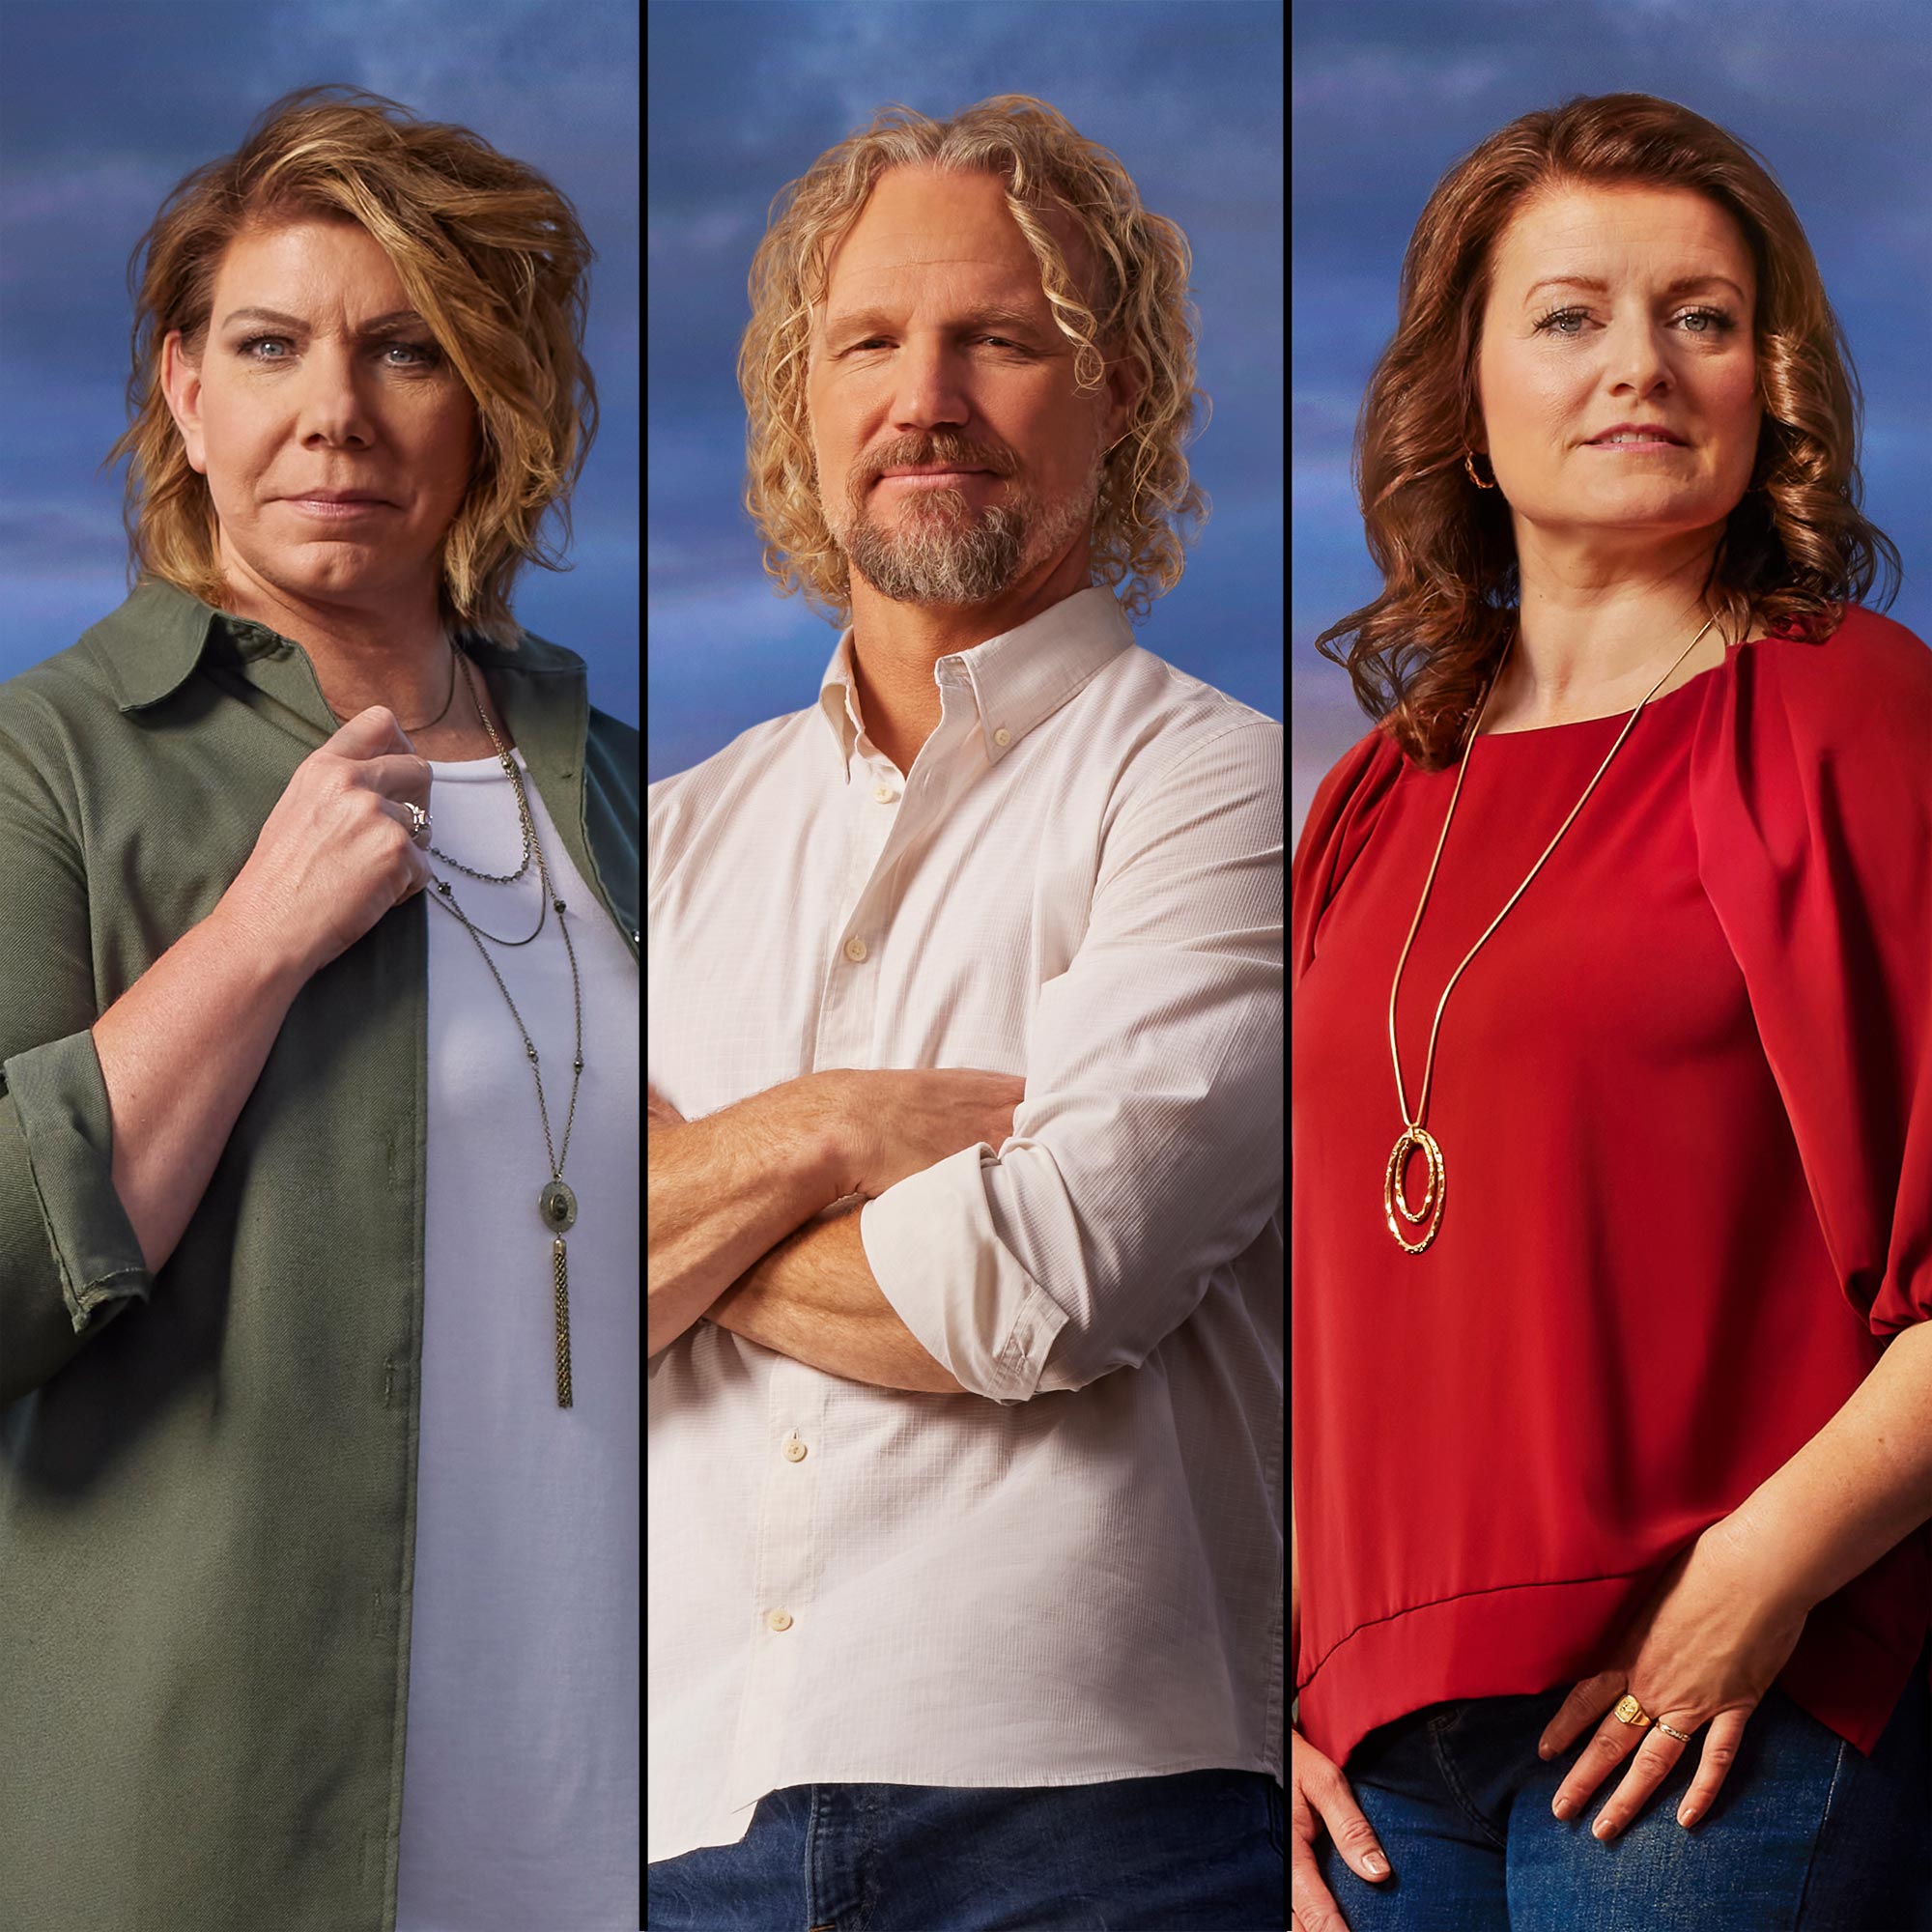 Sister Wives' Meri Jokes She's 'The Other Woman' With Kody and Robyn